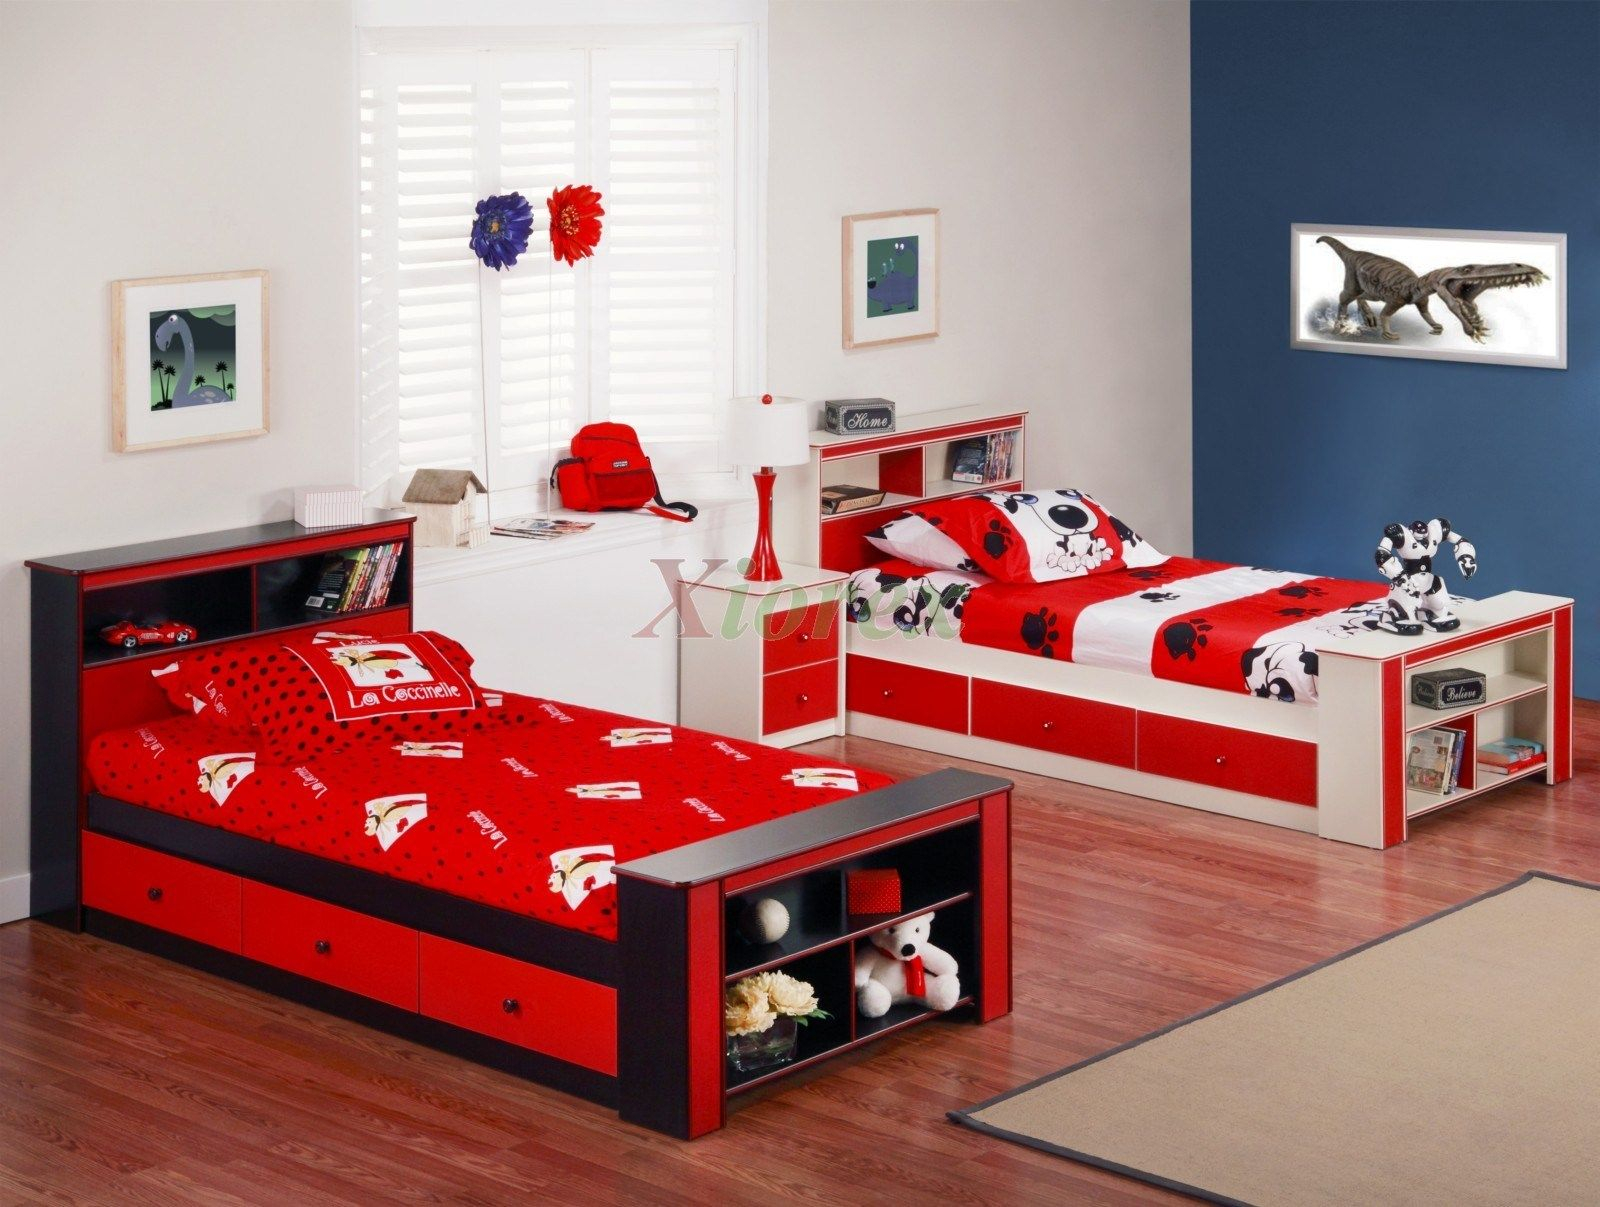 30 Wonderful Image Of Kids Bedroom Furniture Boys Kids Room Twin with regard to proportions 1600 X 1207